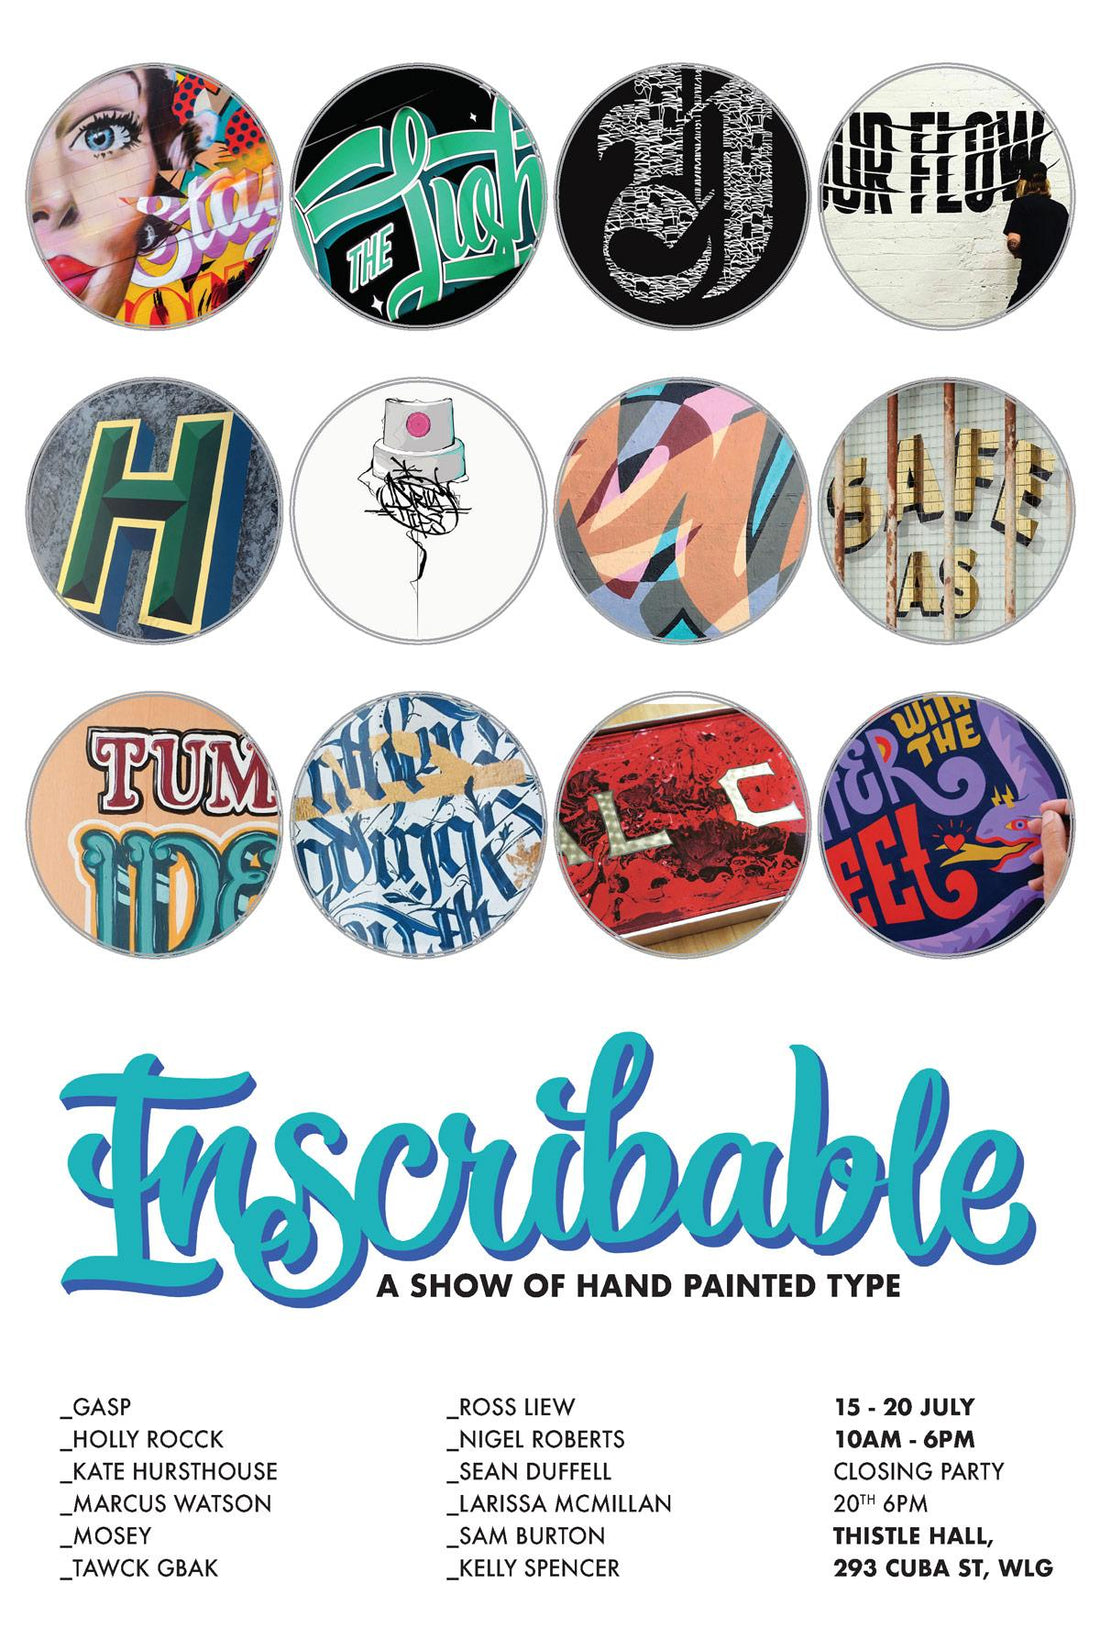 Inscribable 2.0 - A Show of Hand Painted Type